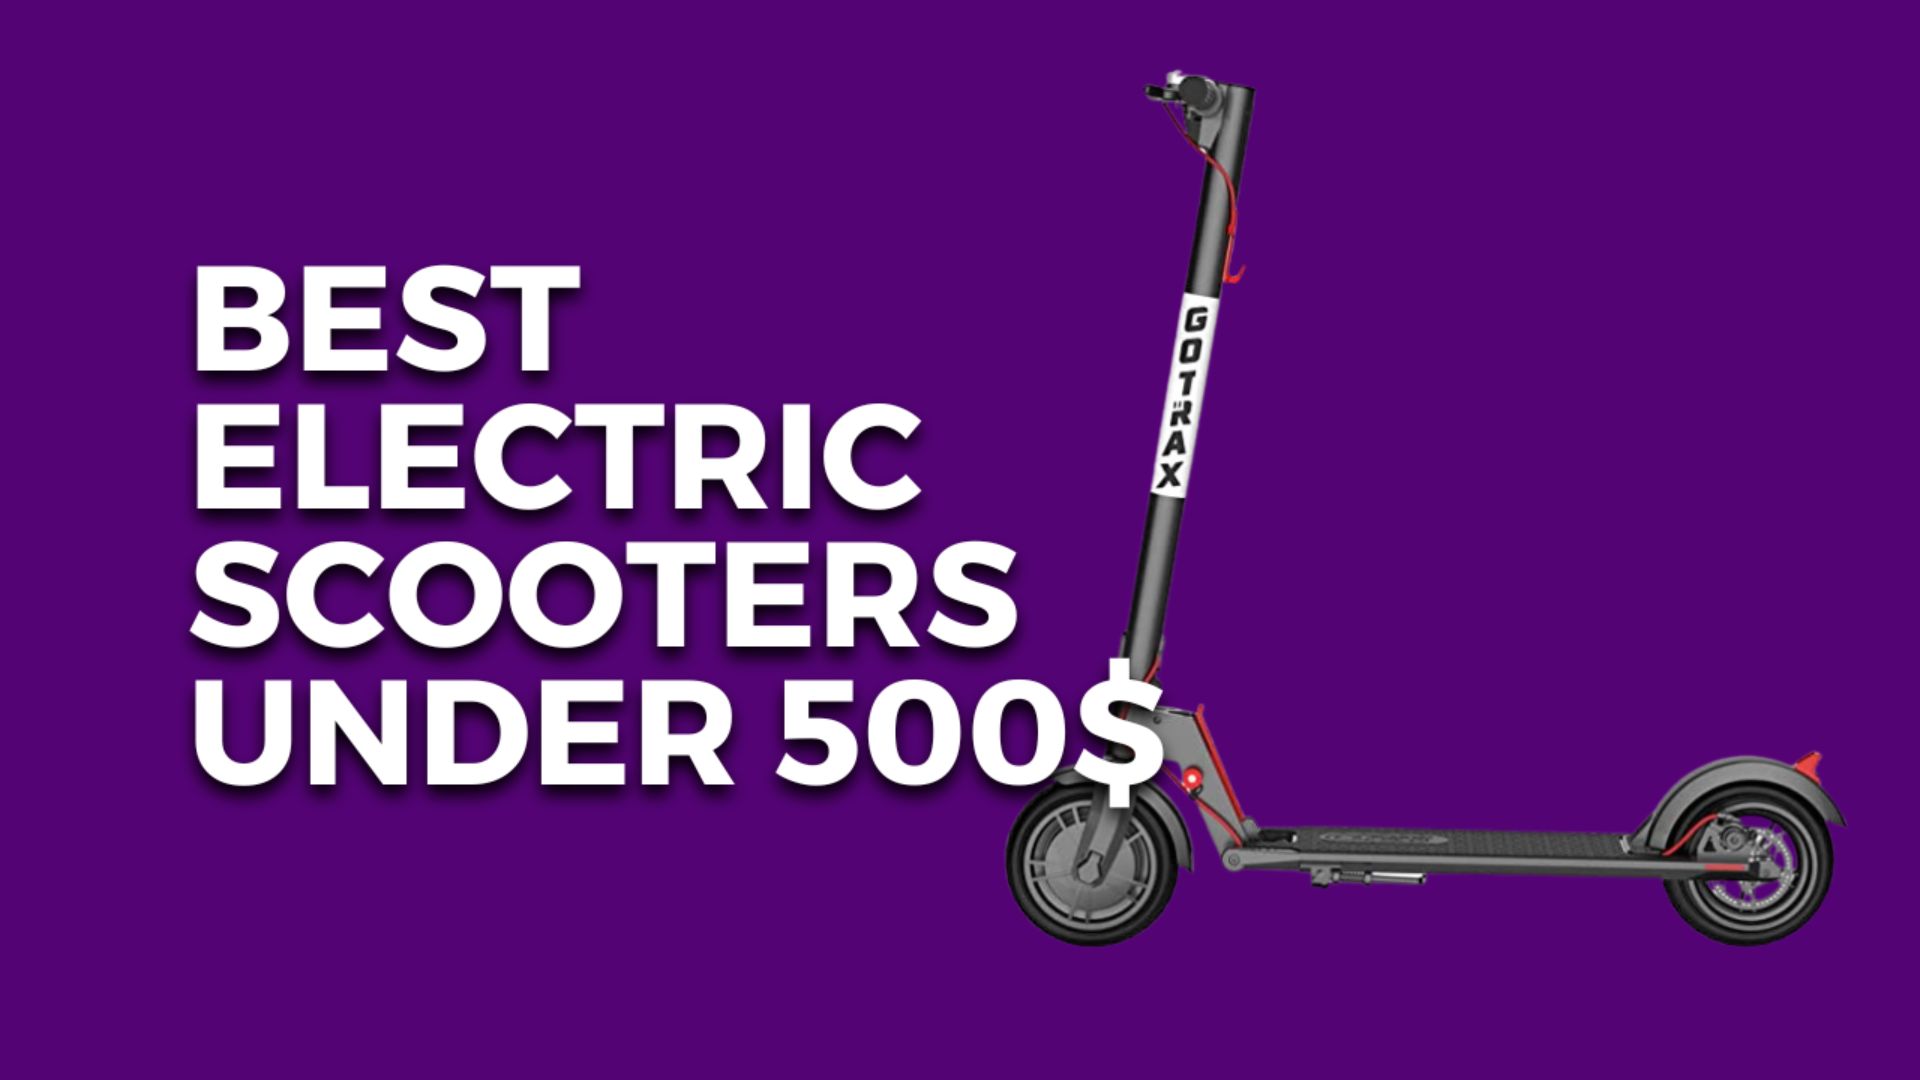 11 Best Electric Scooters Under 500$